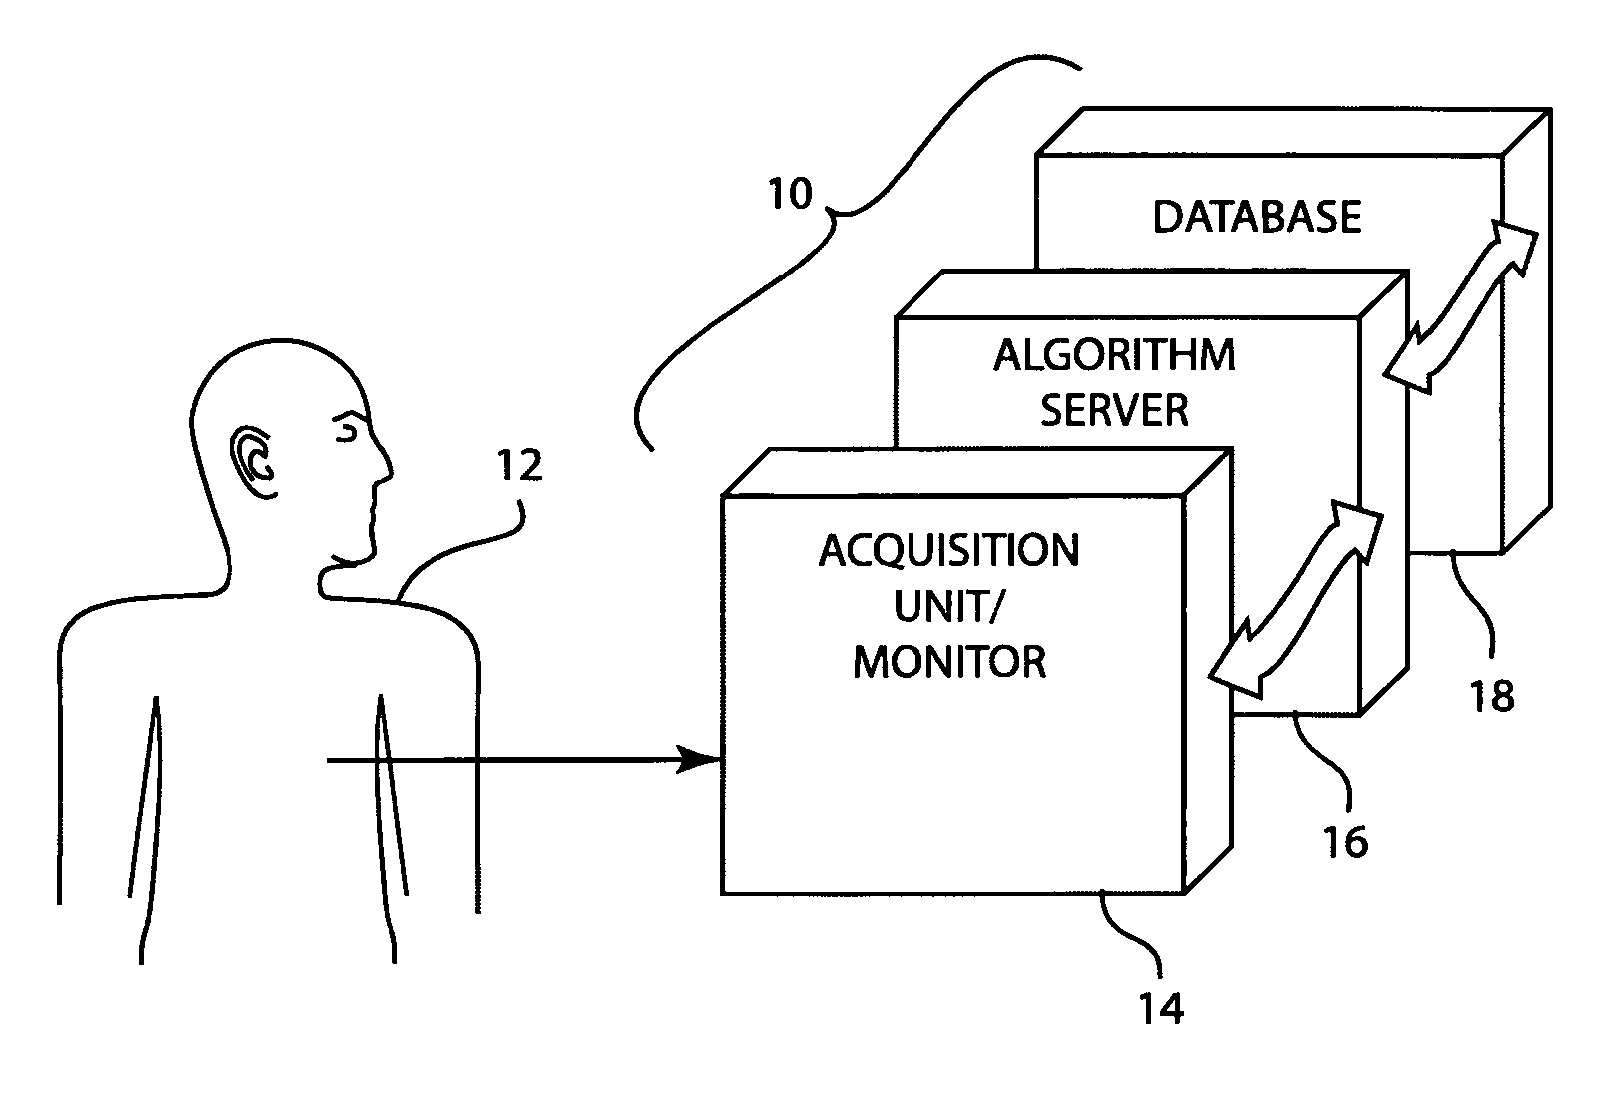 Multi-tier system for cardiology and patient monitoring data analysis